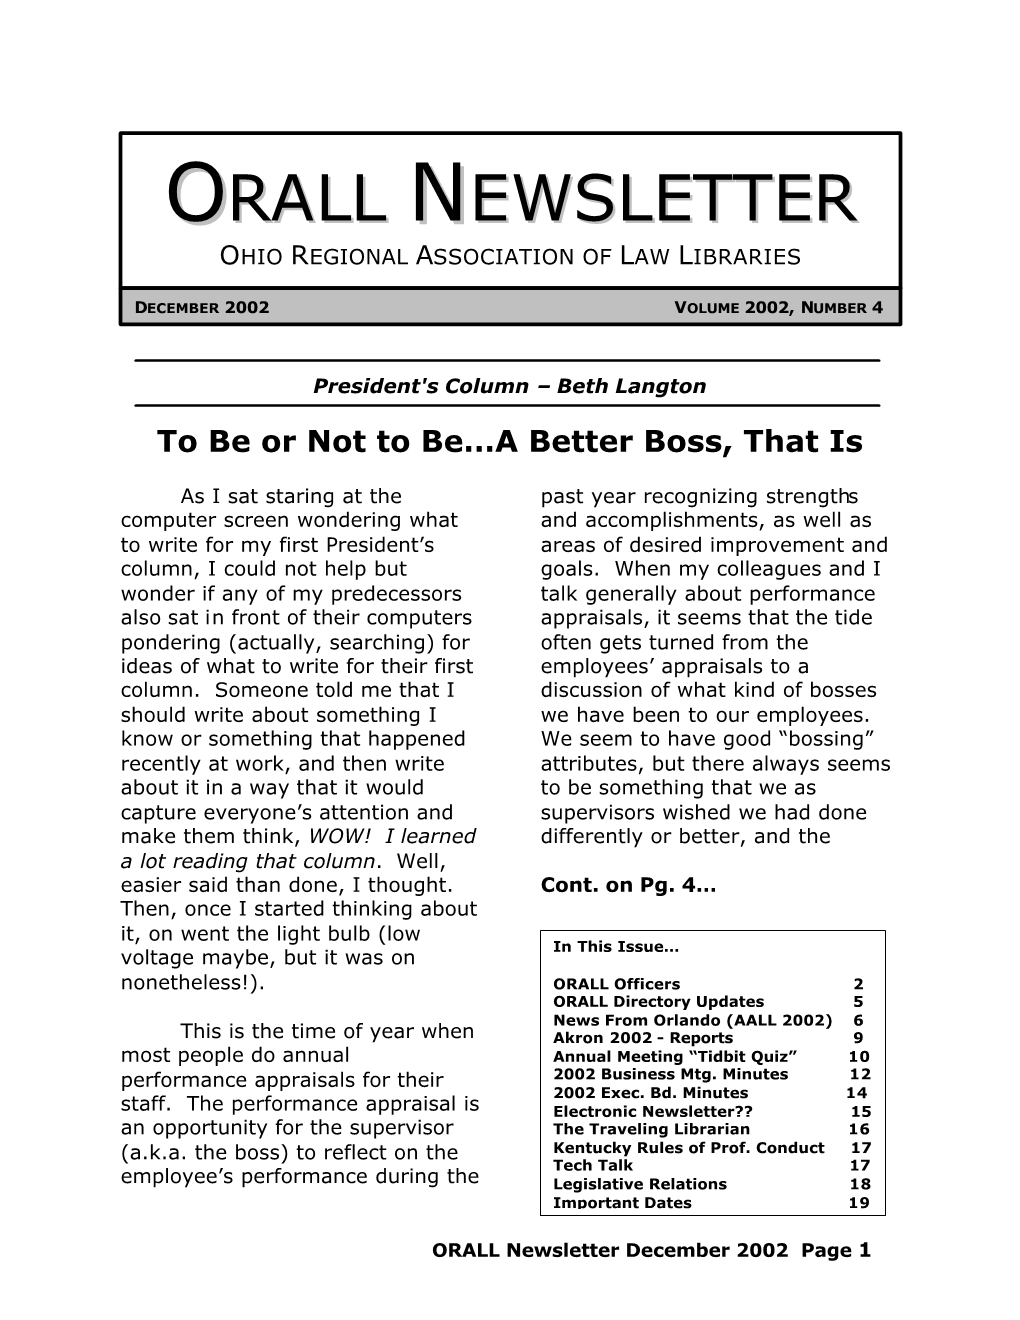 ORALL Newsletter December 2002 Page 1 ORALL Ohio Regional Association of Law Libraries